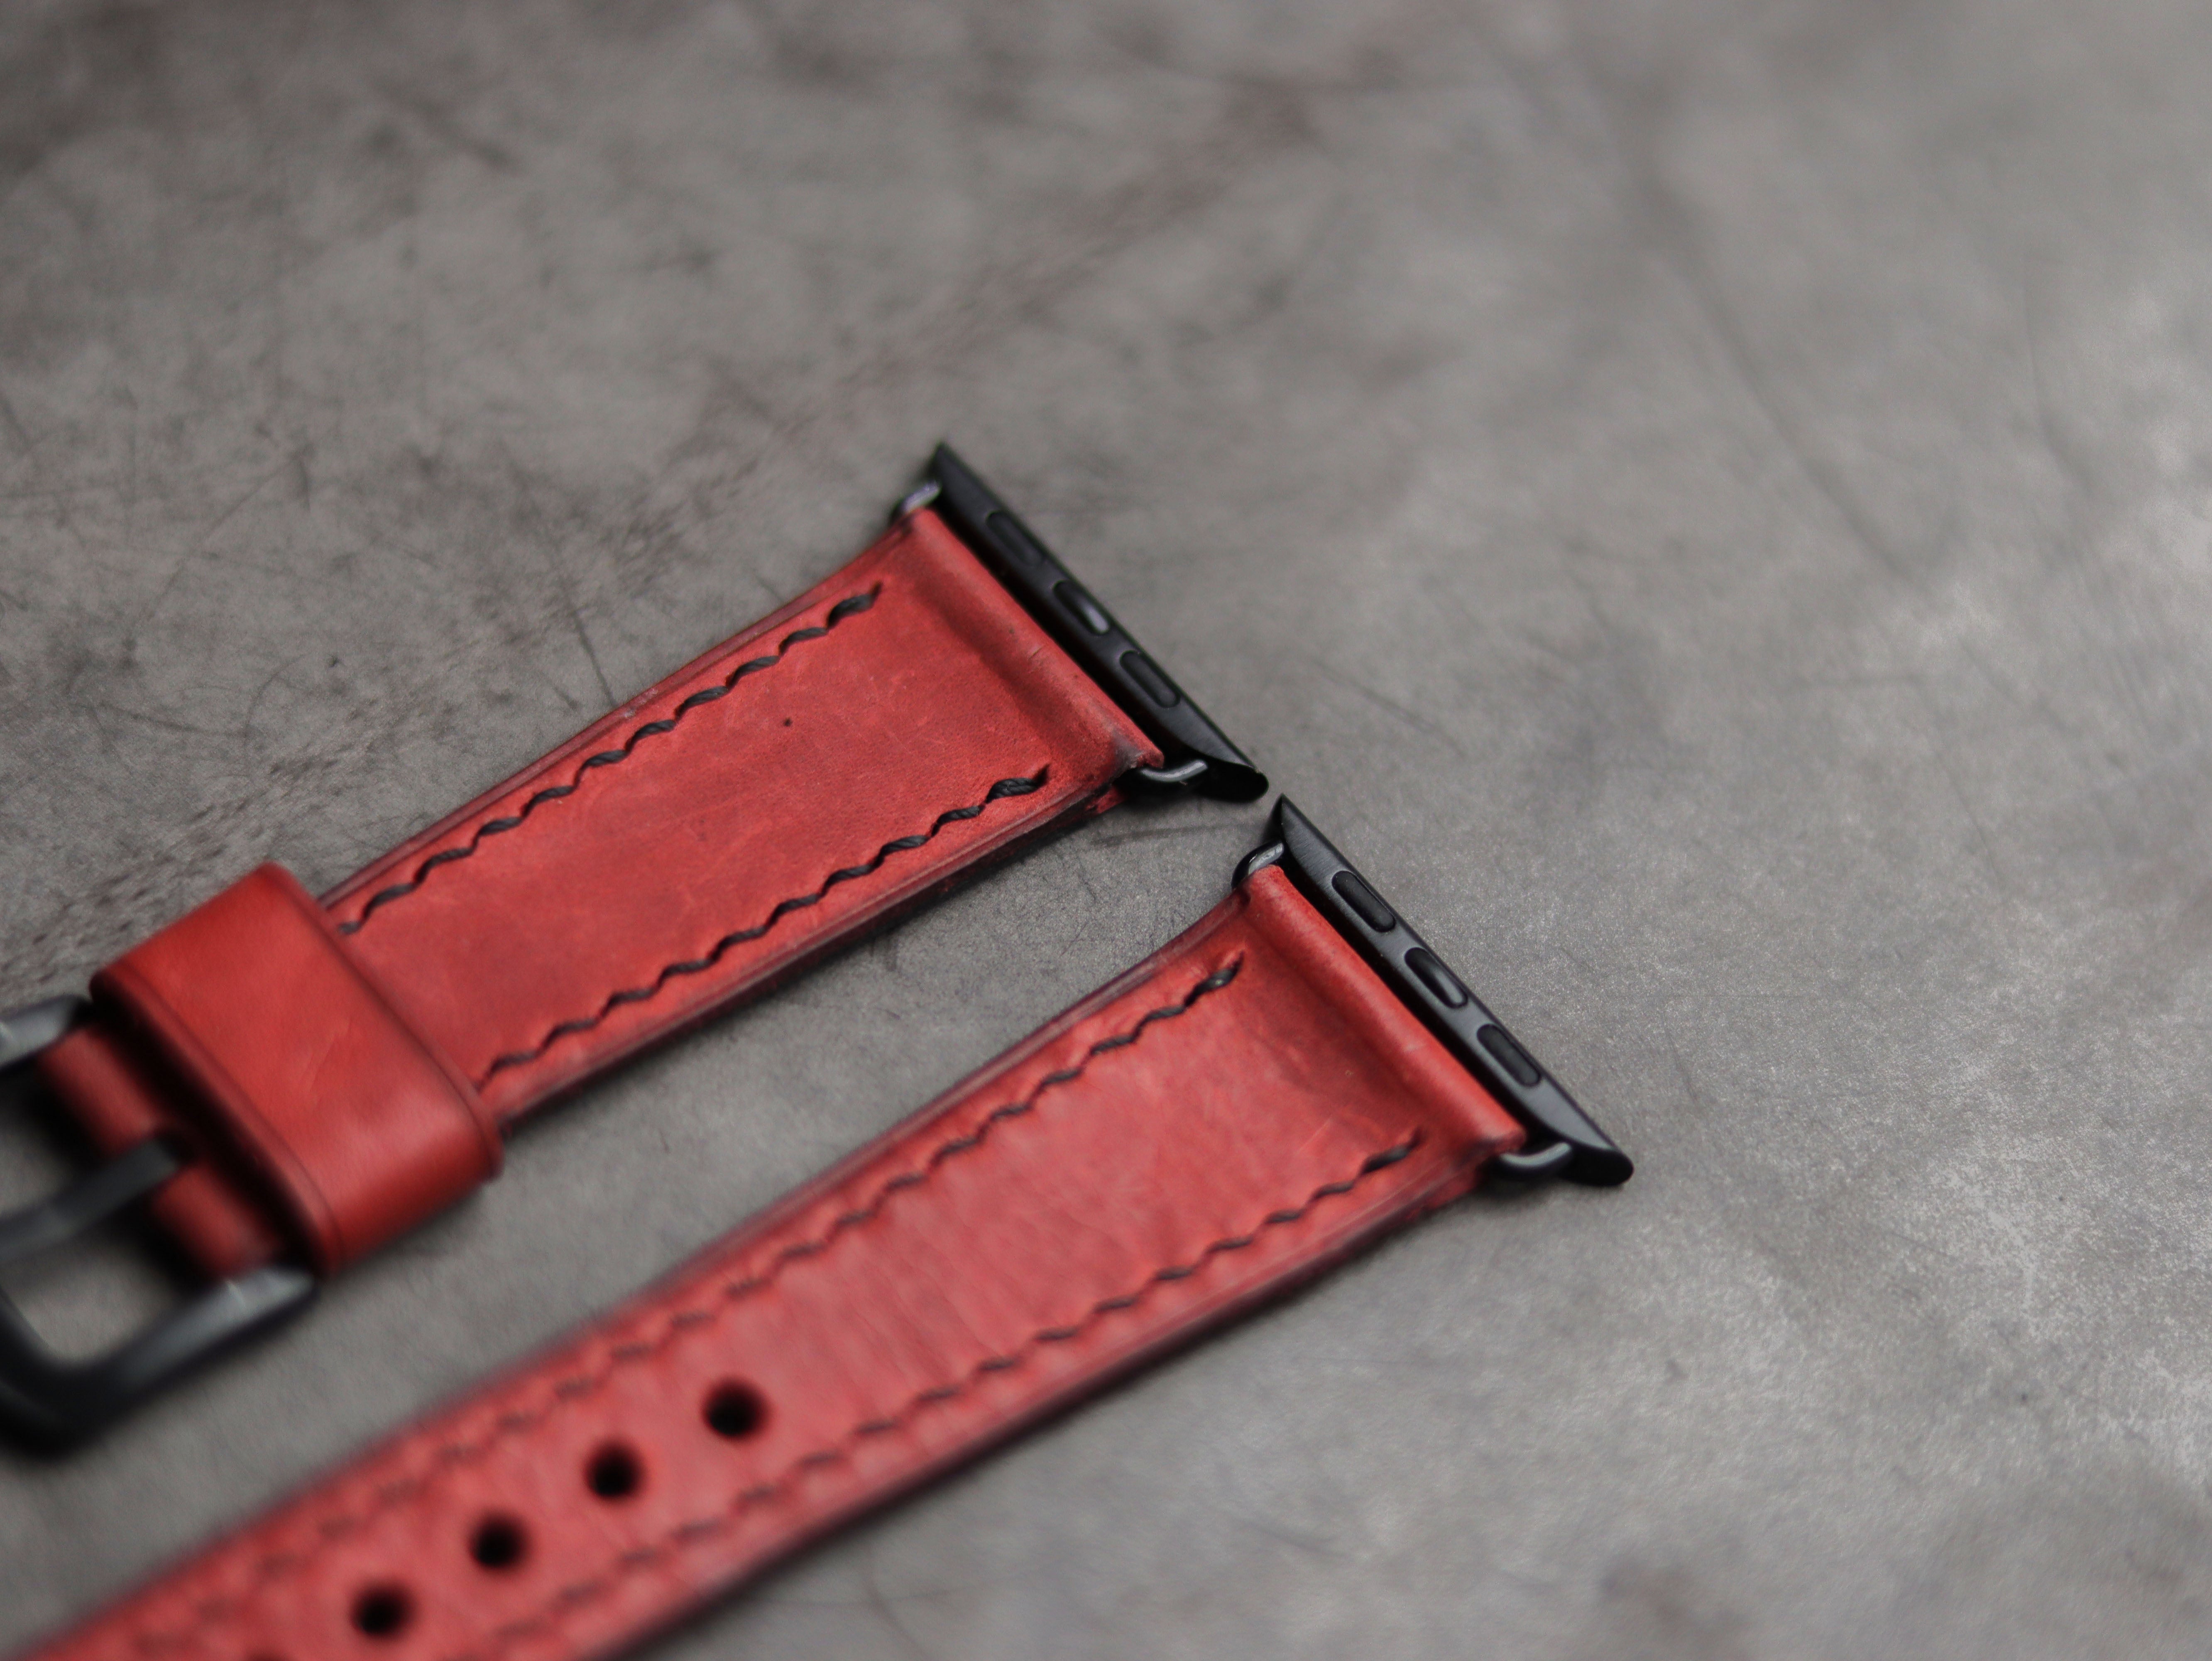 PRISMATIC RED LEATHER - APPLE WATCH STRAPS HAND-CRAFTED